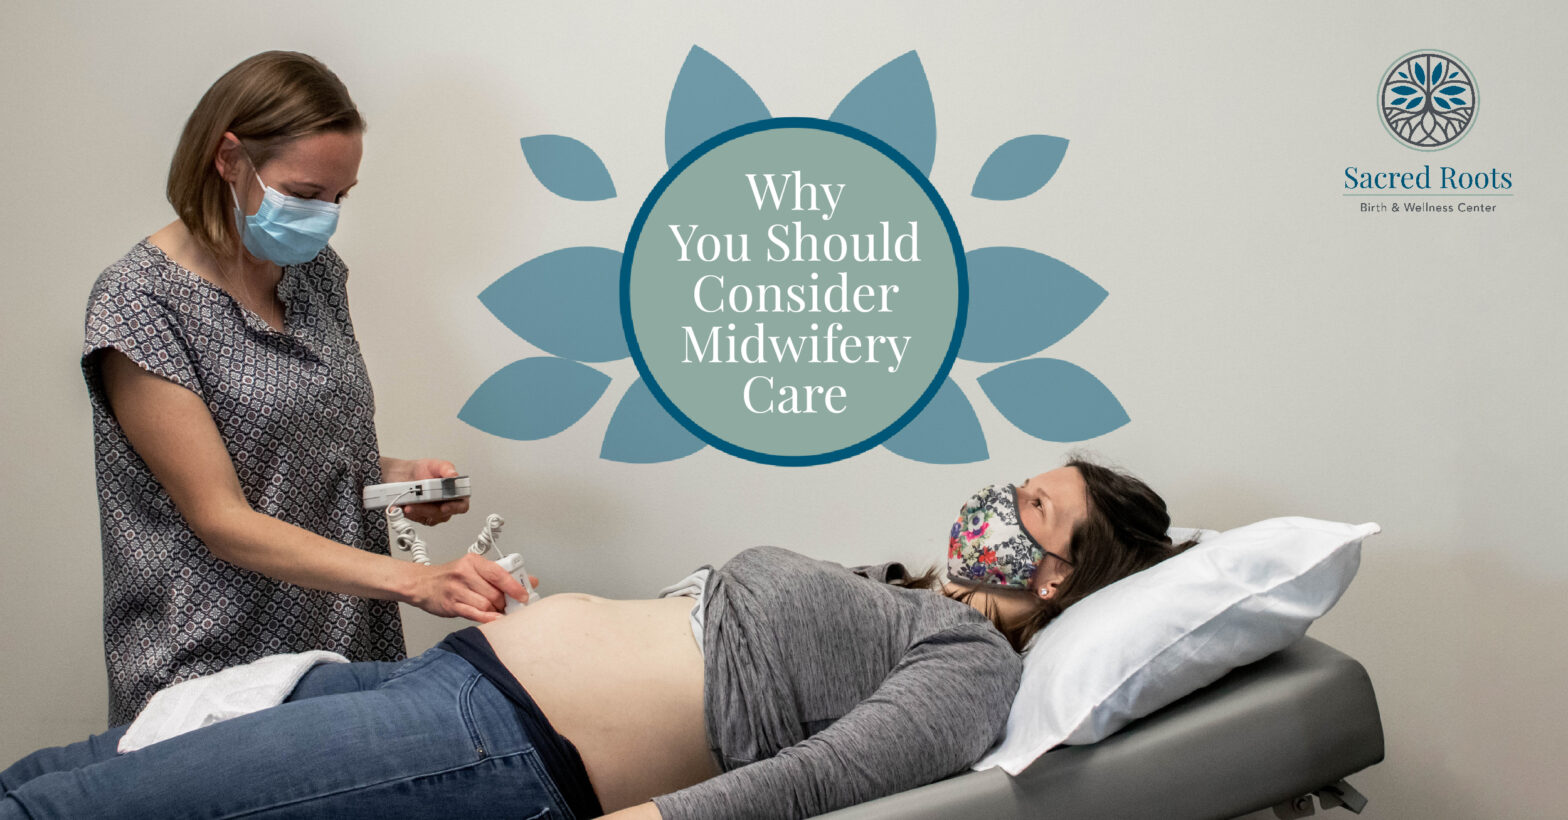 Why You Should Consider Midwifery Care